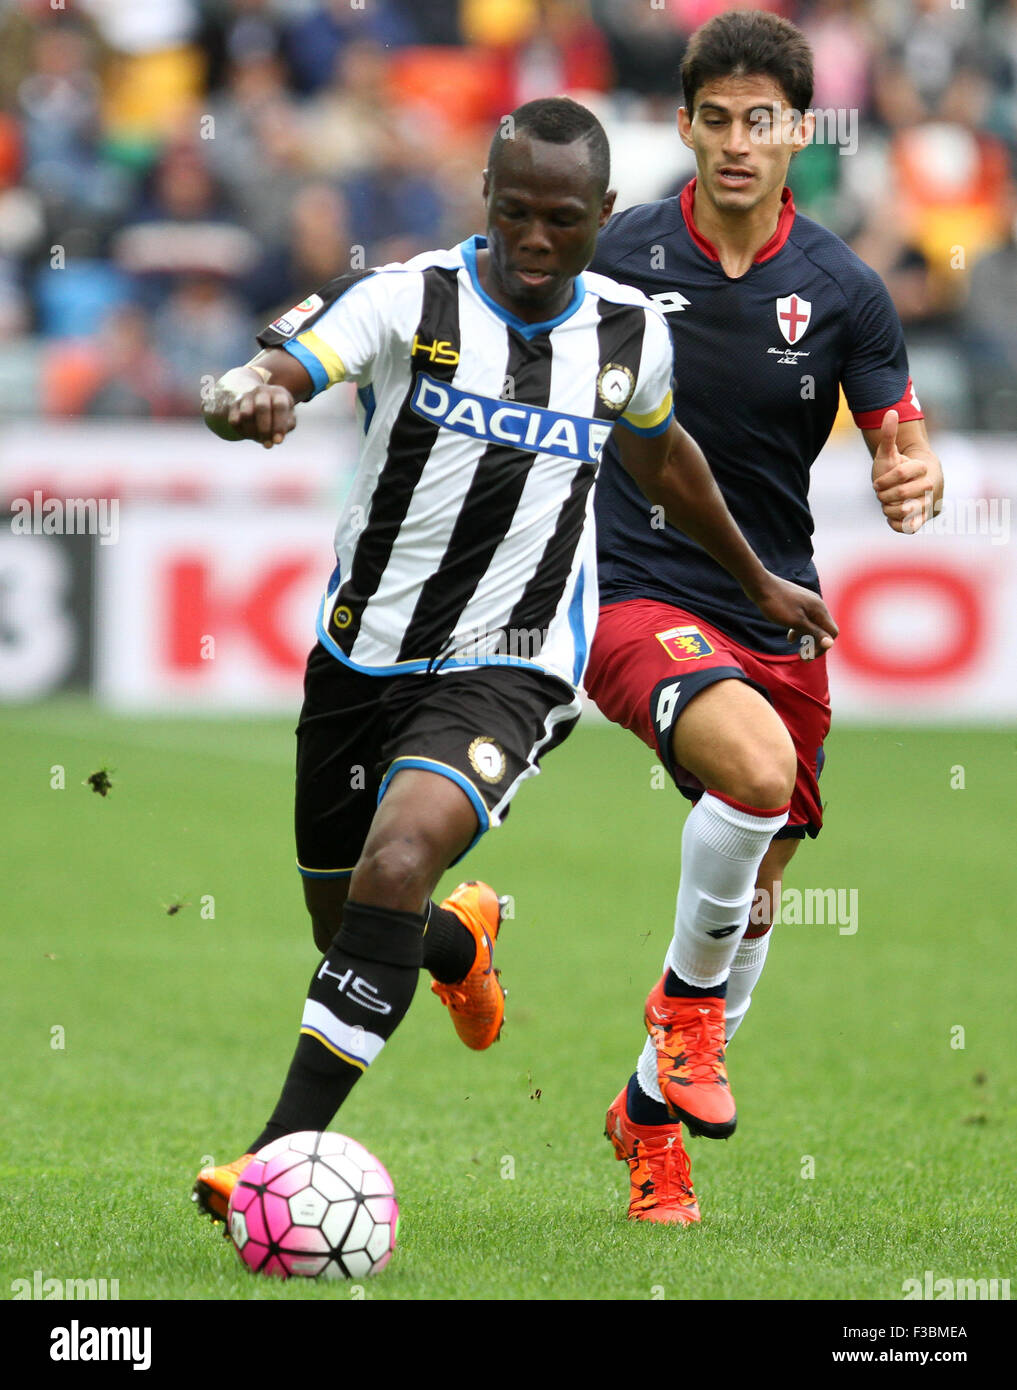 Udine, Italy. 4th October, 2015. Udinese's midfielder Emmanuel Agyemang Badu runs with balls behind Genoa's midfielder Diego Perotti follow him during the Italian Serie A football match between Udinese Calcio v Genoa Cfc at Friuli Stadium on 4 October, 2015 at Udine. Credit:  Andrea Spinelli/Alamy Live News Stock Photo